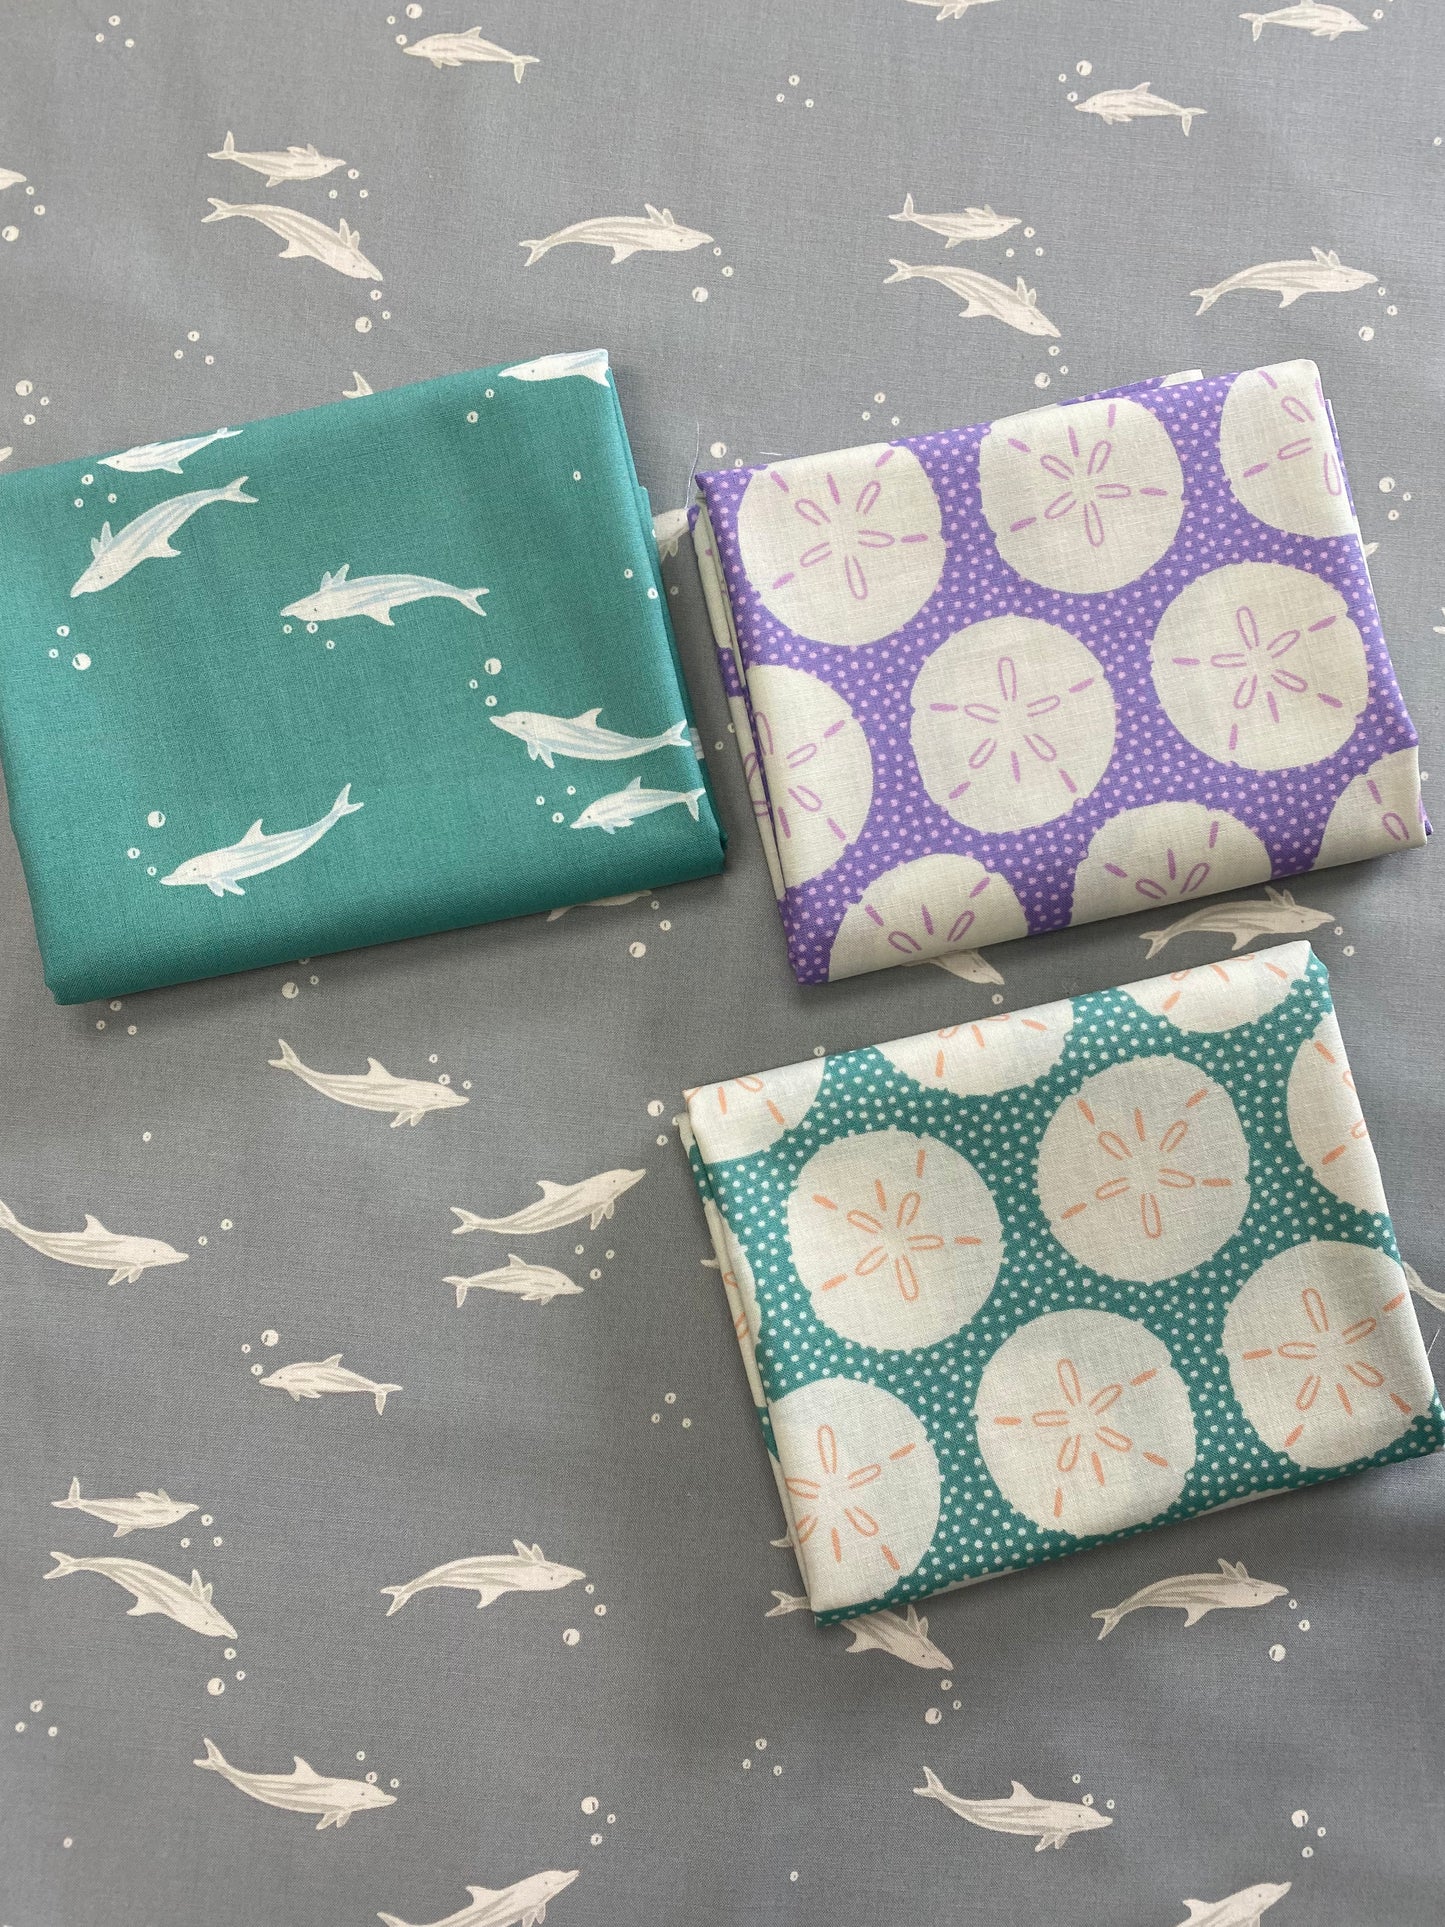 Florida 2 by Sarah Watts for Ruby Star Society Dolphins Steel     RS2059-11 Cotton Woven Fabric